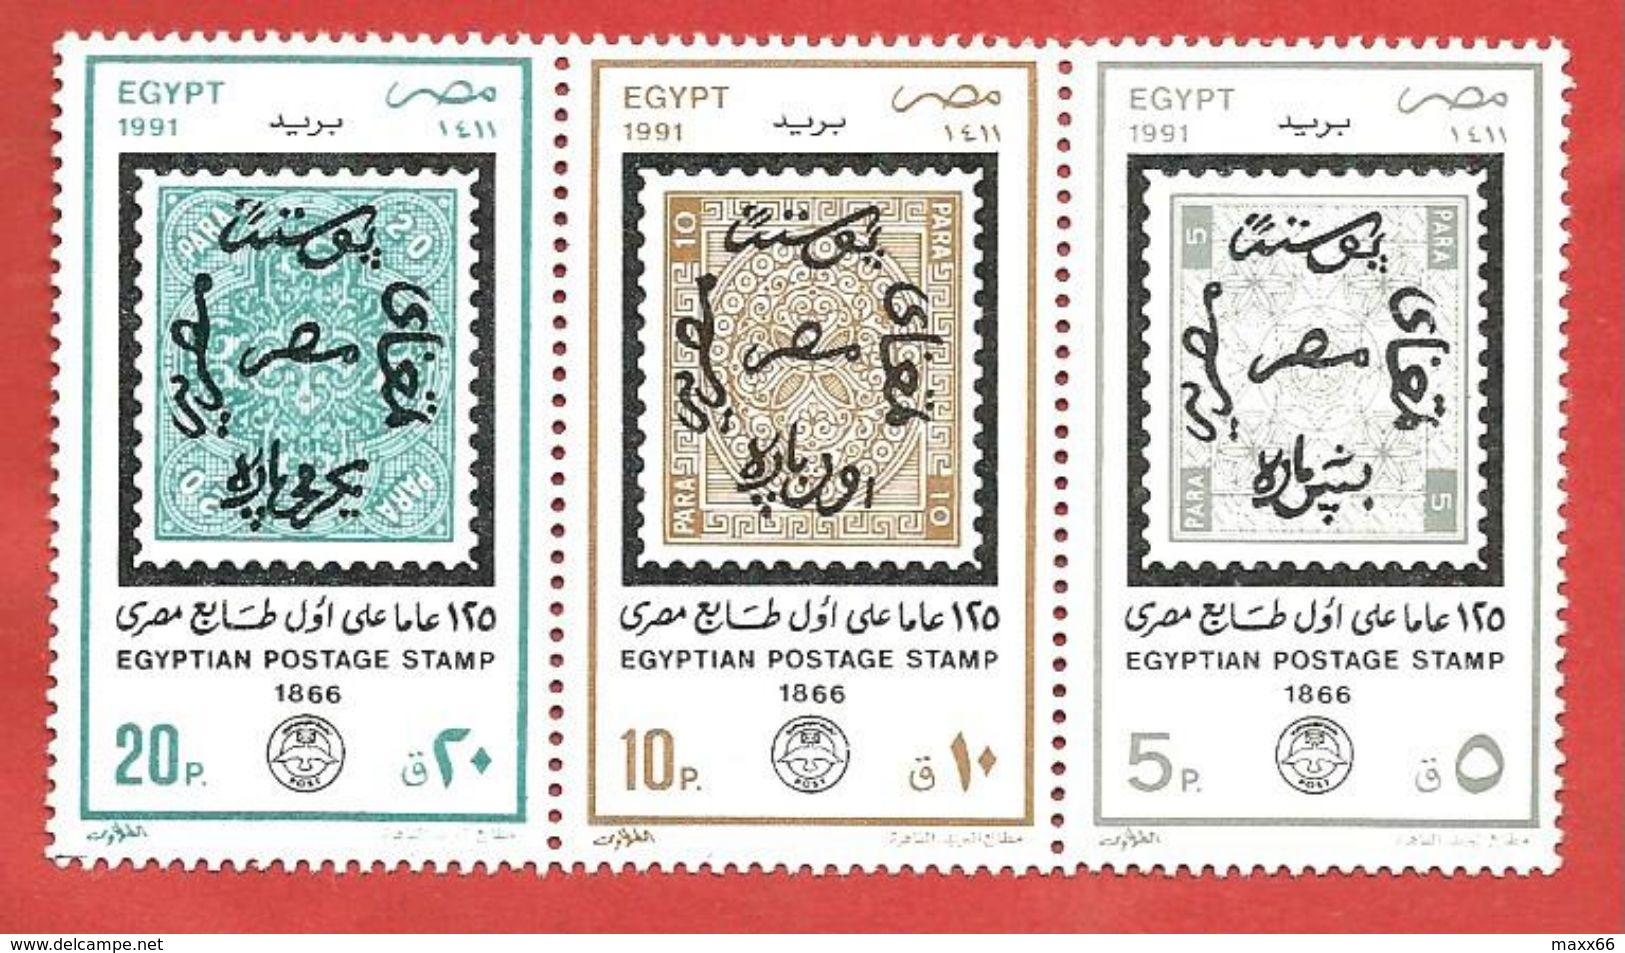 EGITTO EGYPT MNH - 1991 125th Anniversary Of First Egyptian Stamps - 5 + 10 + 20 Piastre - Michel AR EG 1697 - 1699 - Unused Stamps